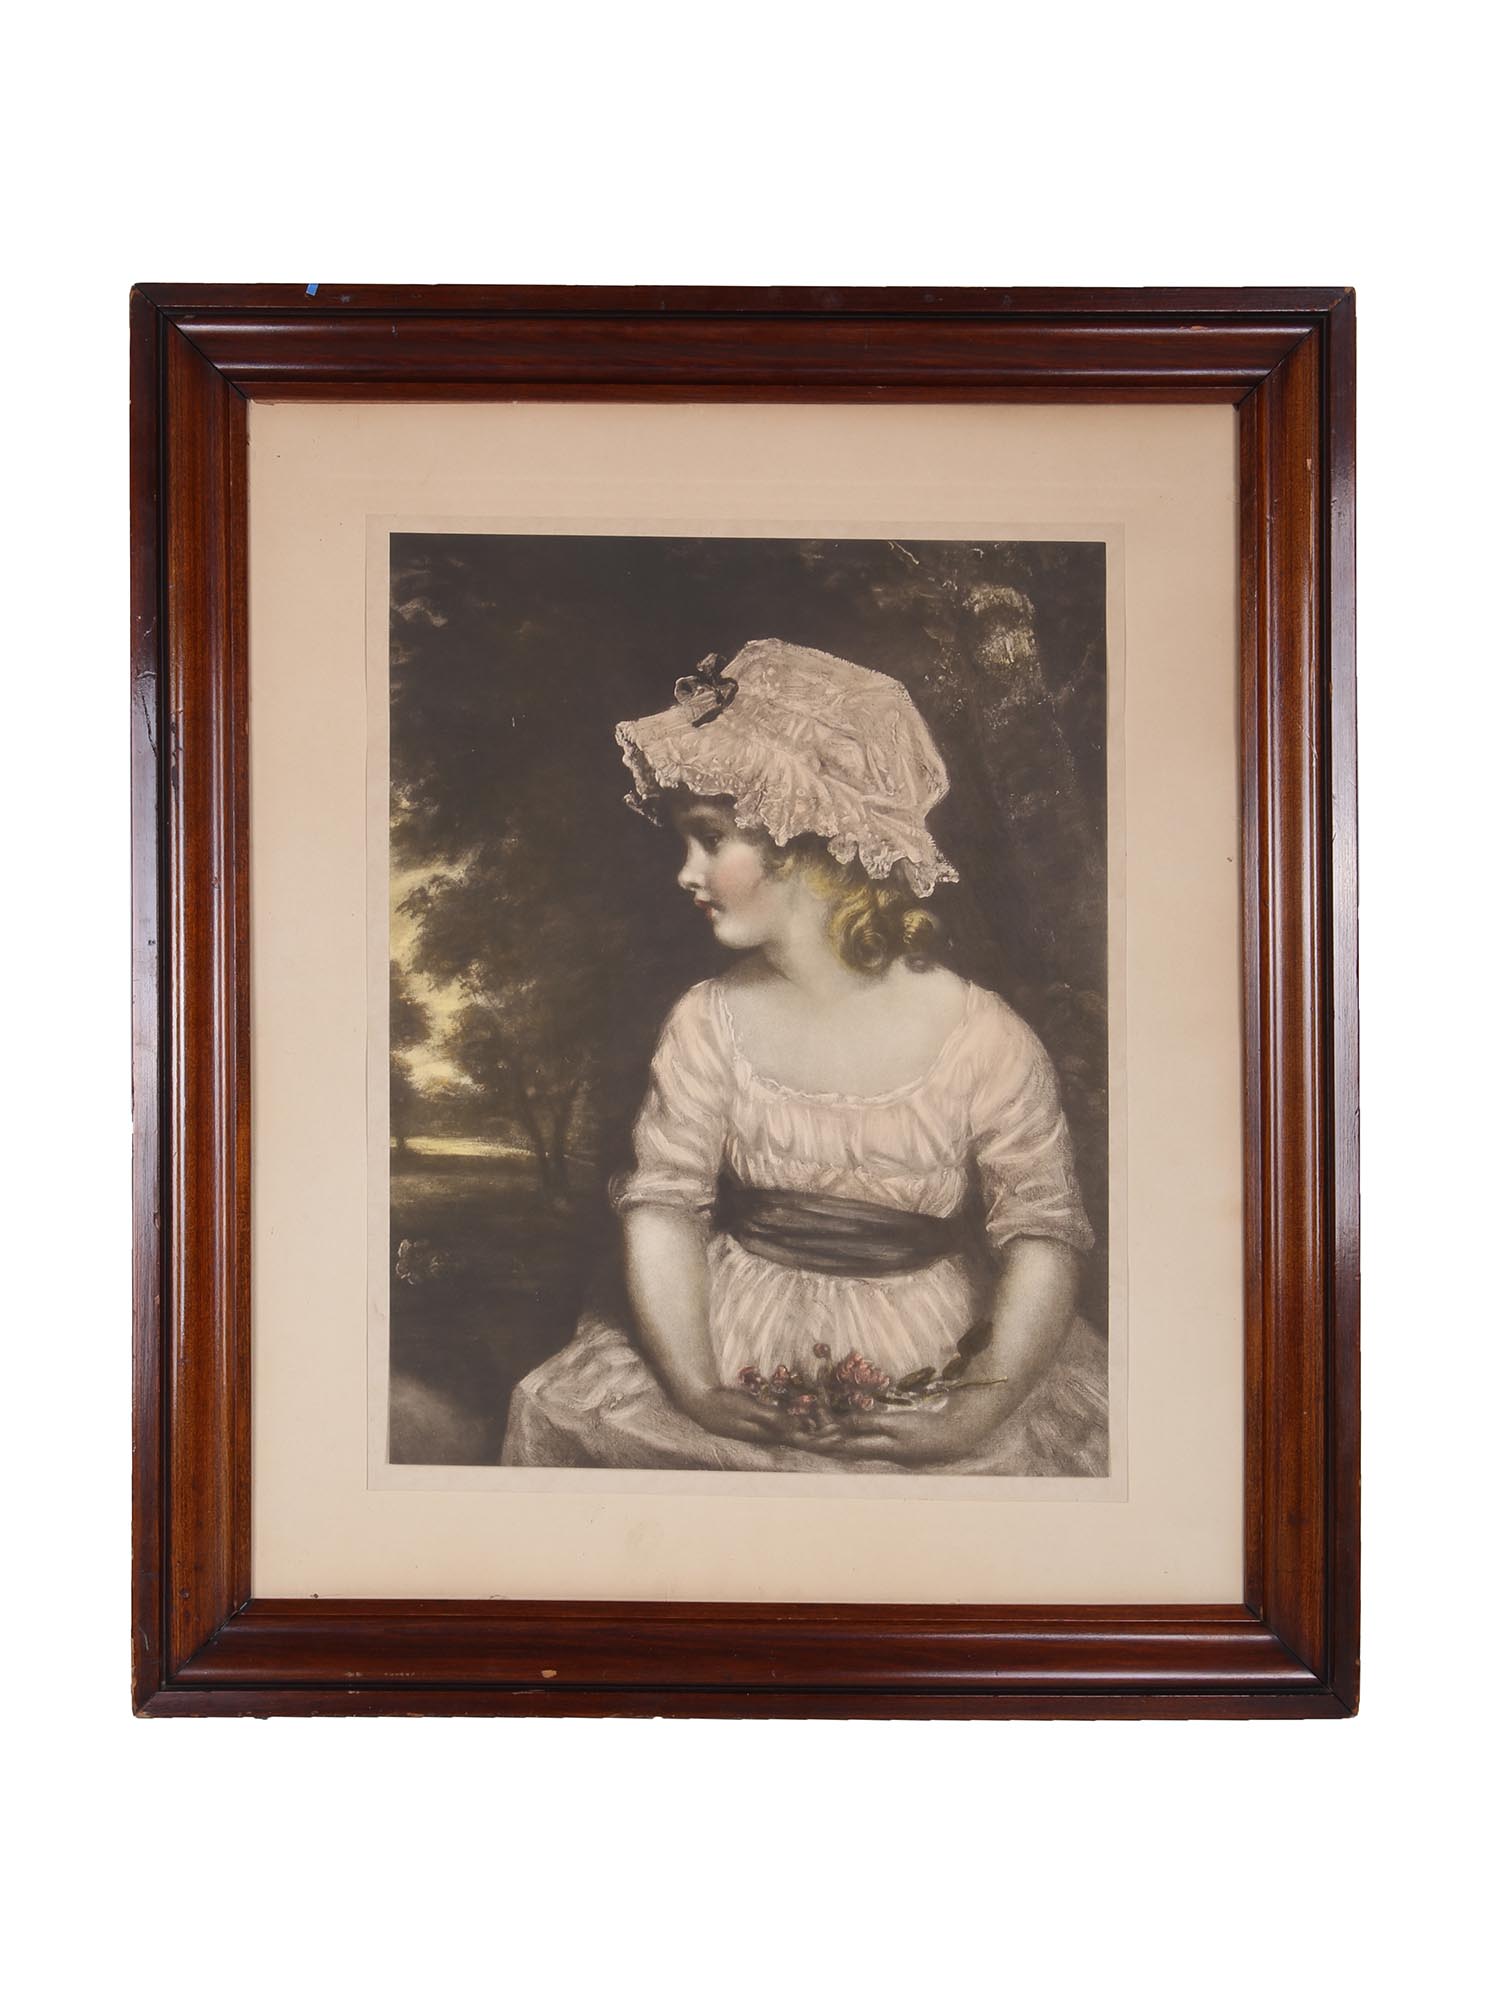 ANTIQUE PRINT GIRL WITH FLOWERS AFTER REYNOLDS